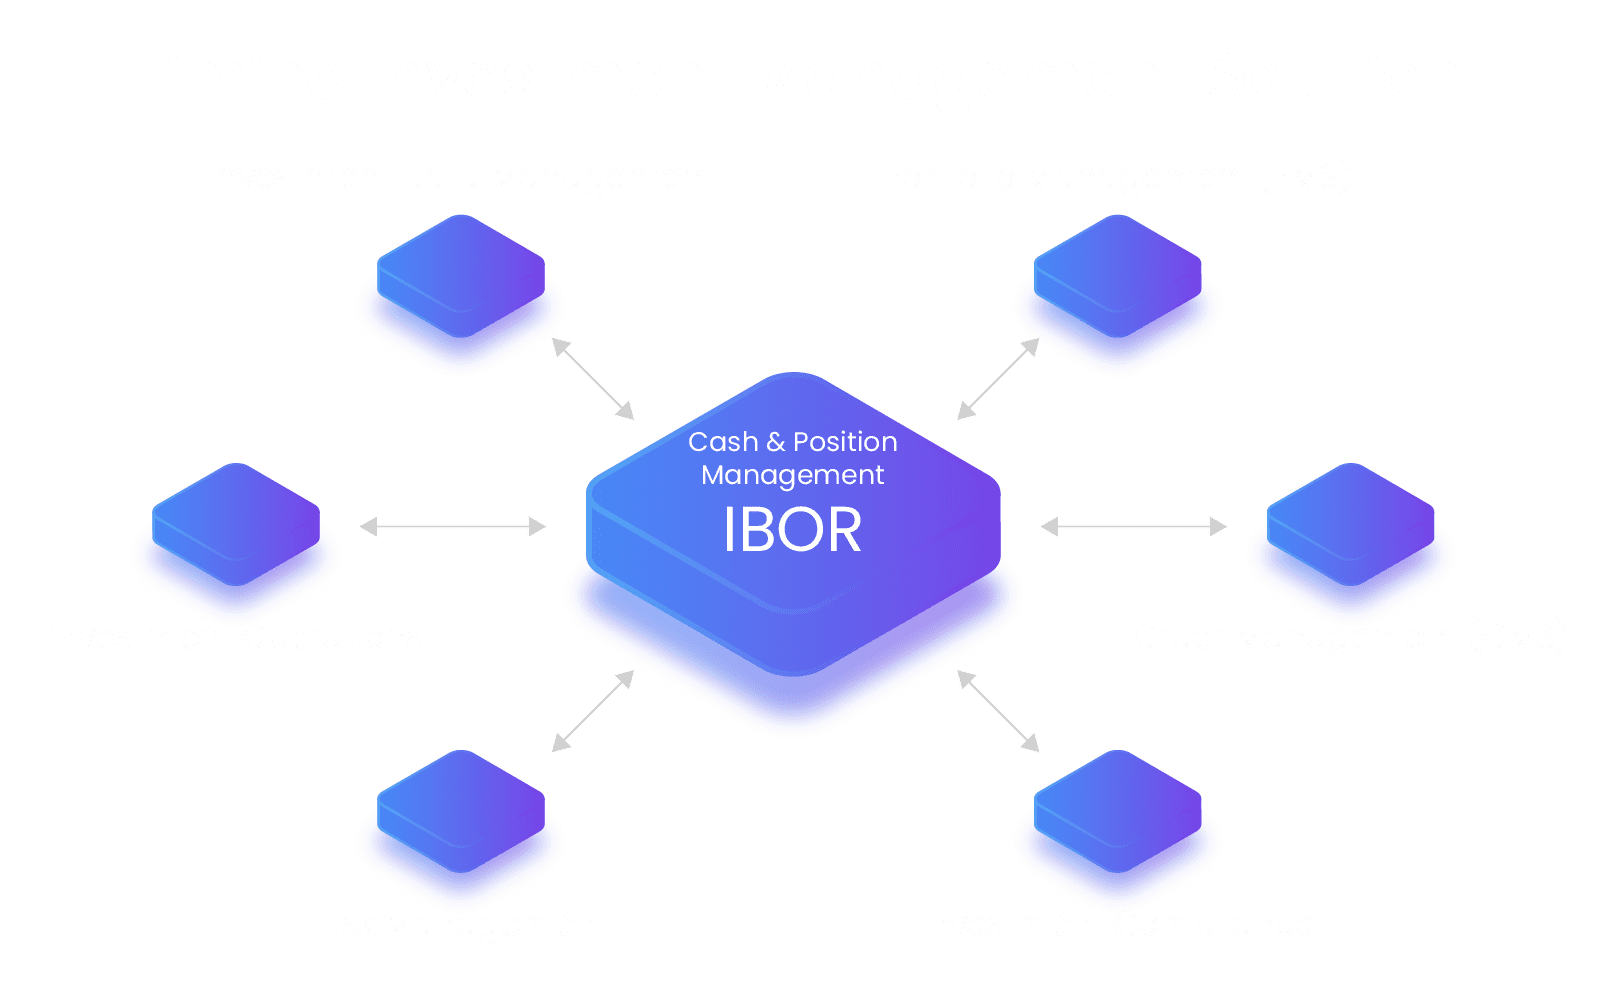 Investment Data Management with the Limina IMS